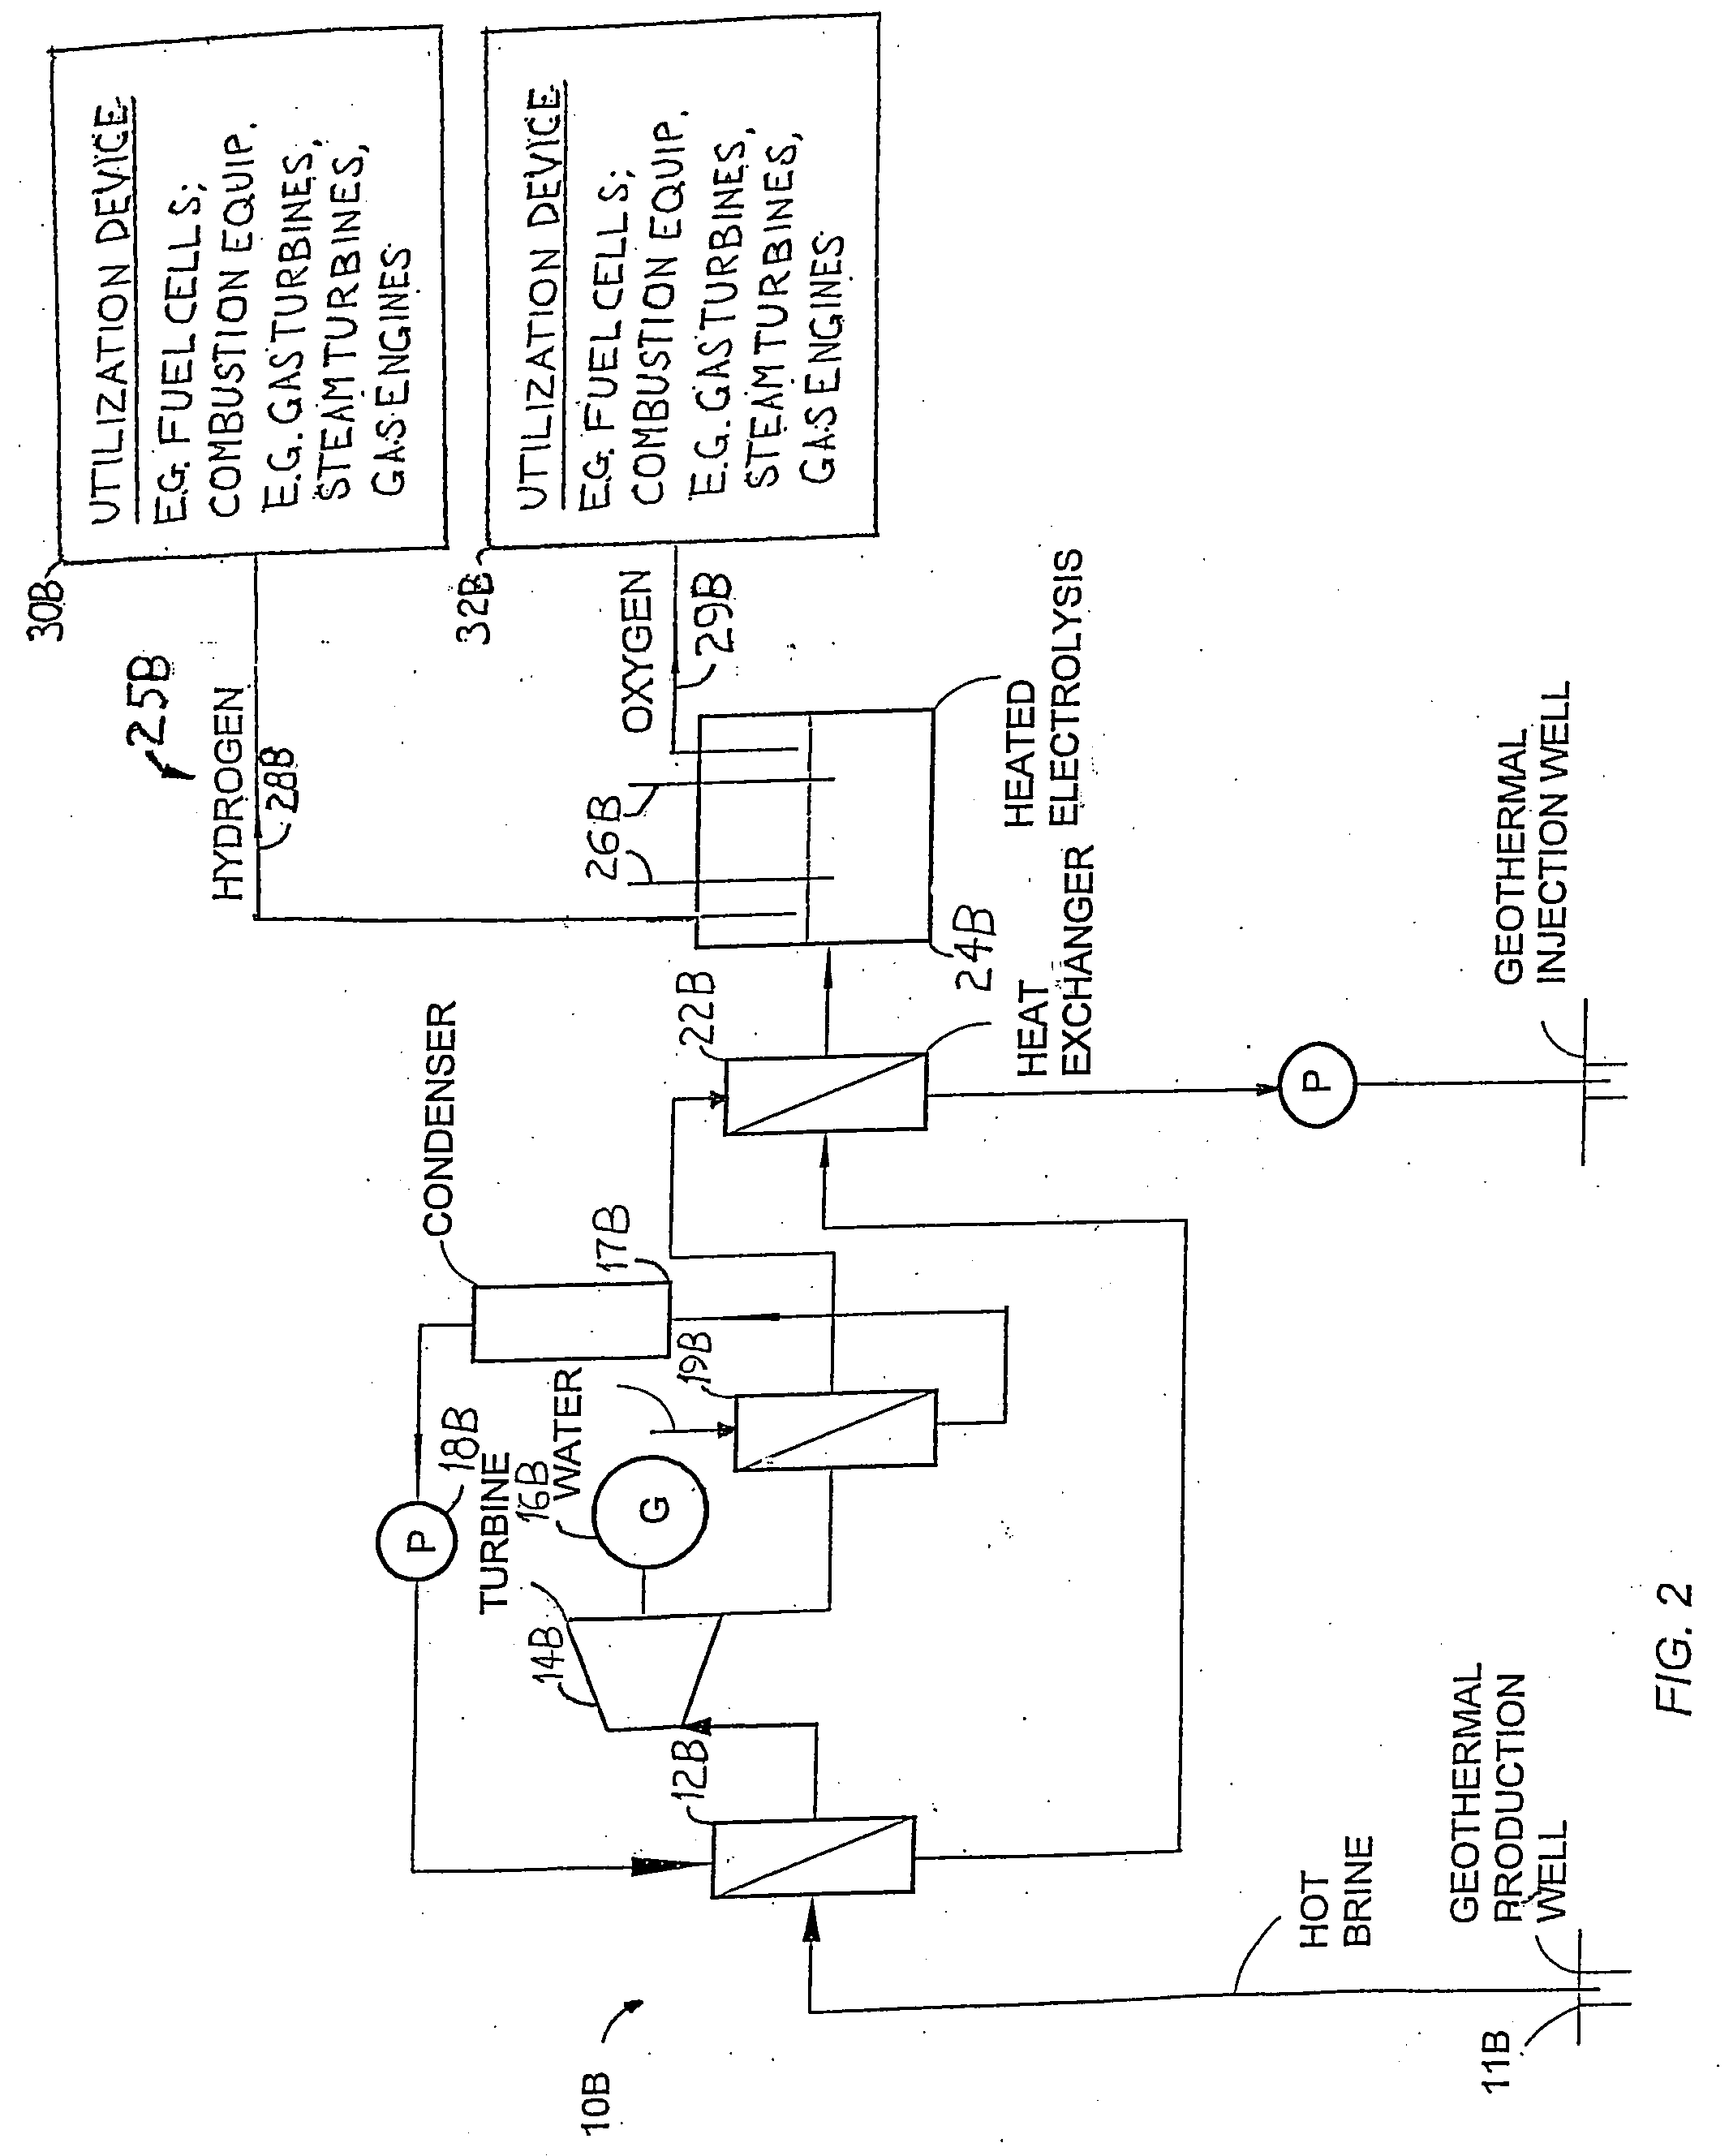 Method of and apparatus for producing hydrogen using geothermal energy